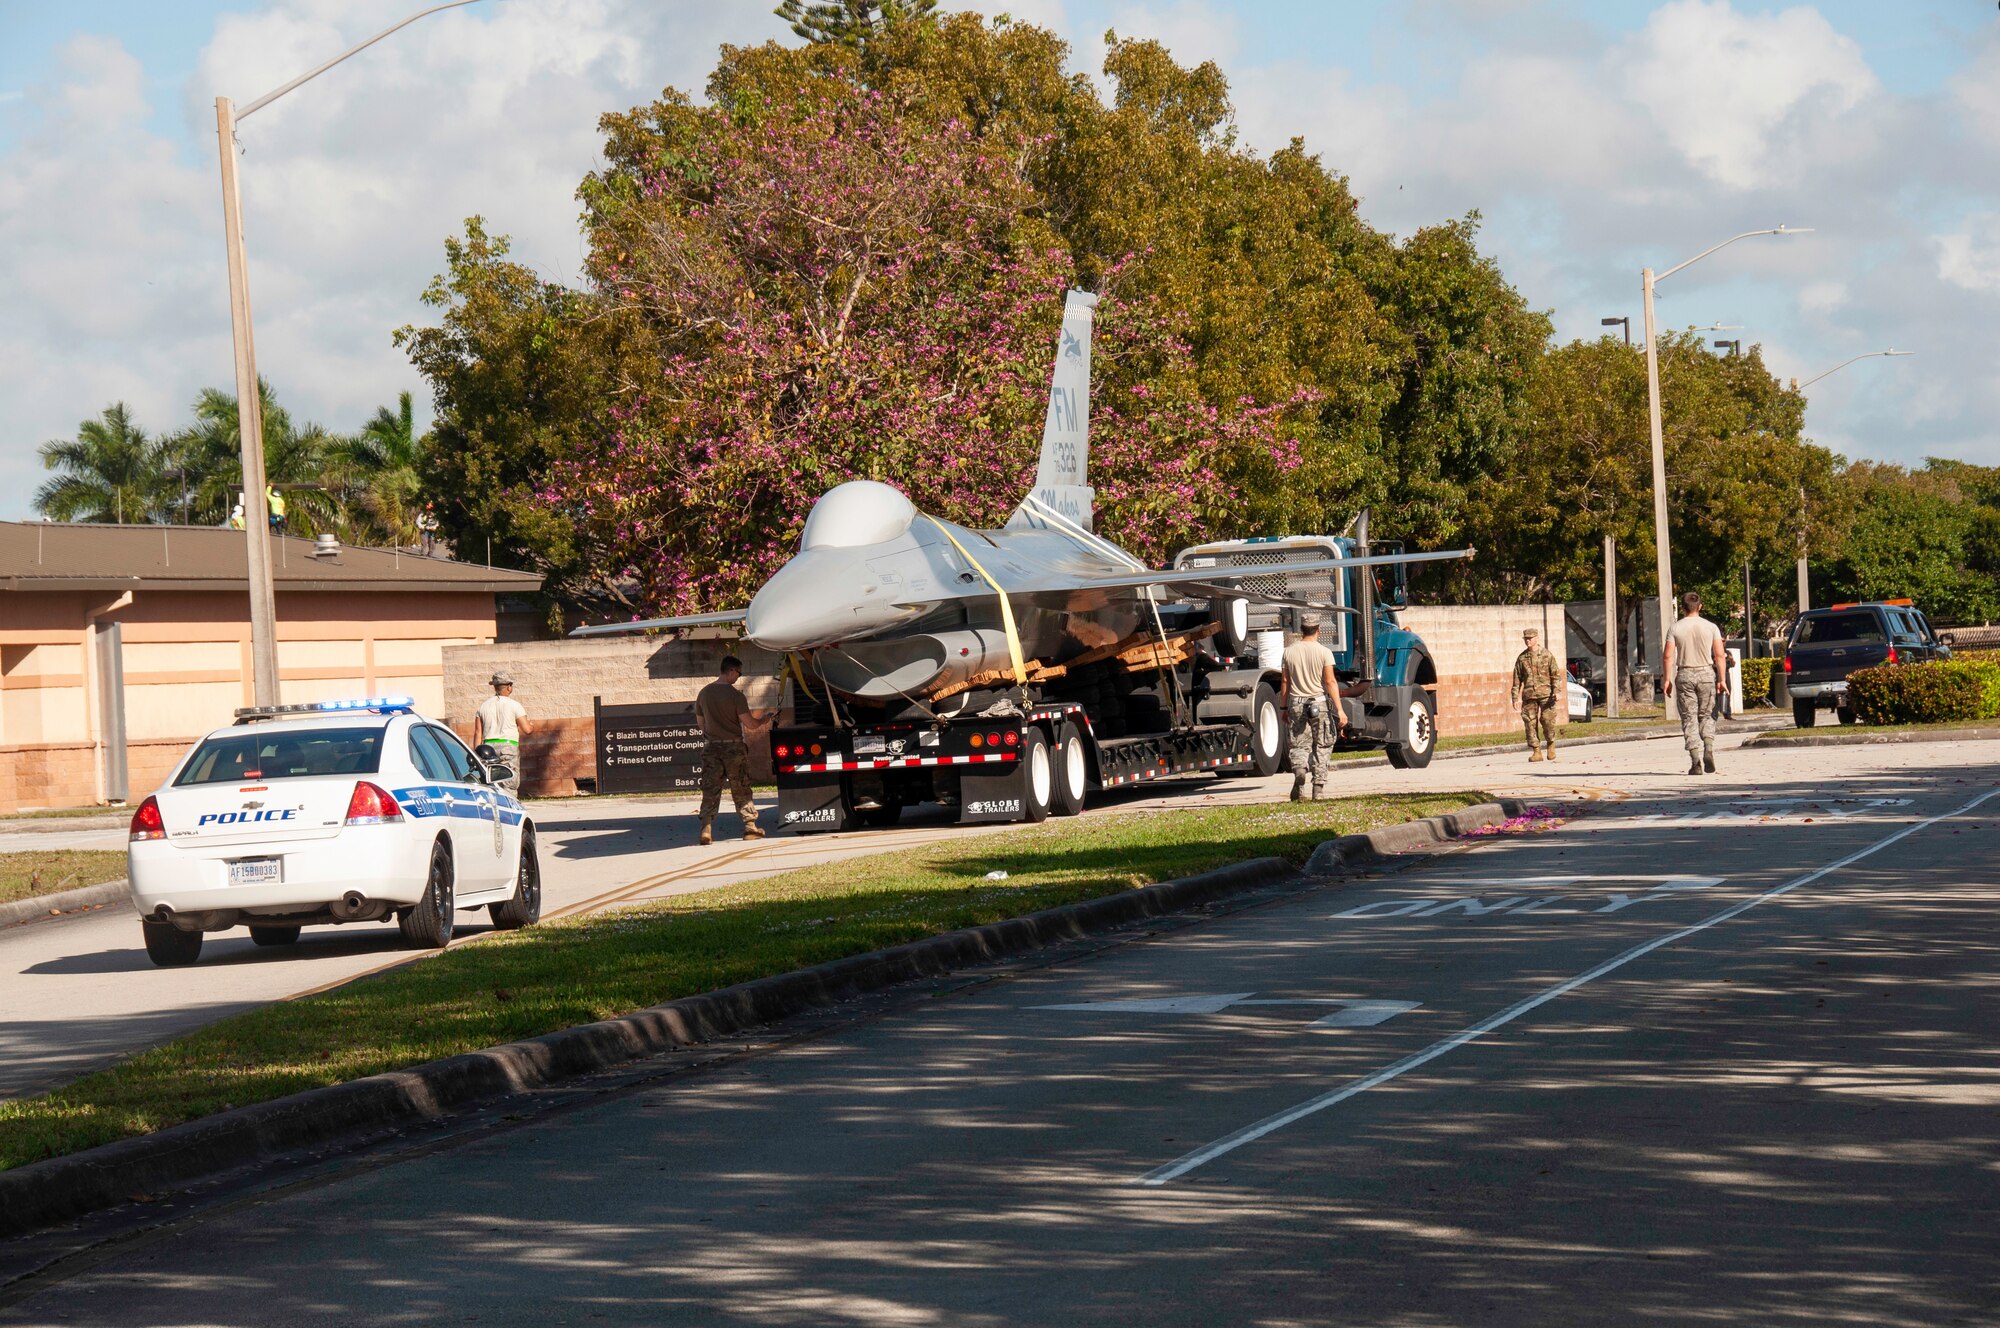 Members of the 482nd Maintenance Group, Homestead Air Reserve Base, Fla., transport an F-16C to be reinstalled on its “perch” after giving it a full corrosion control update and a shiny new paint job on February 10, 2021.